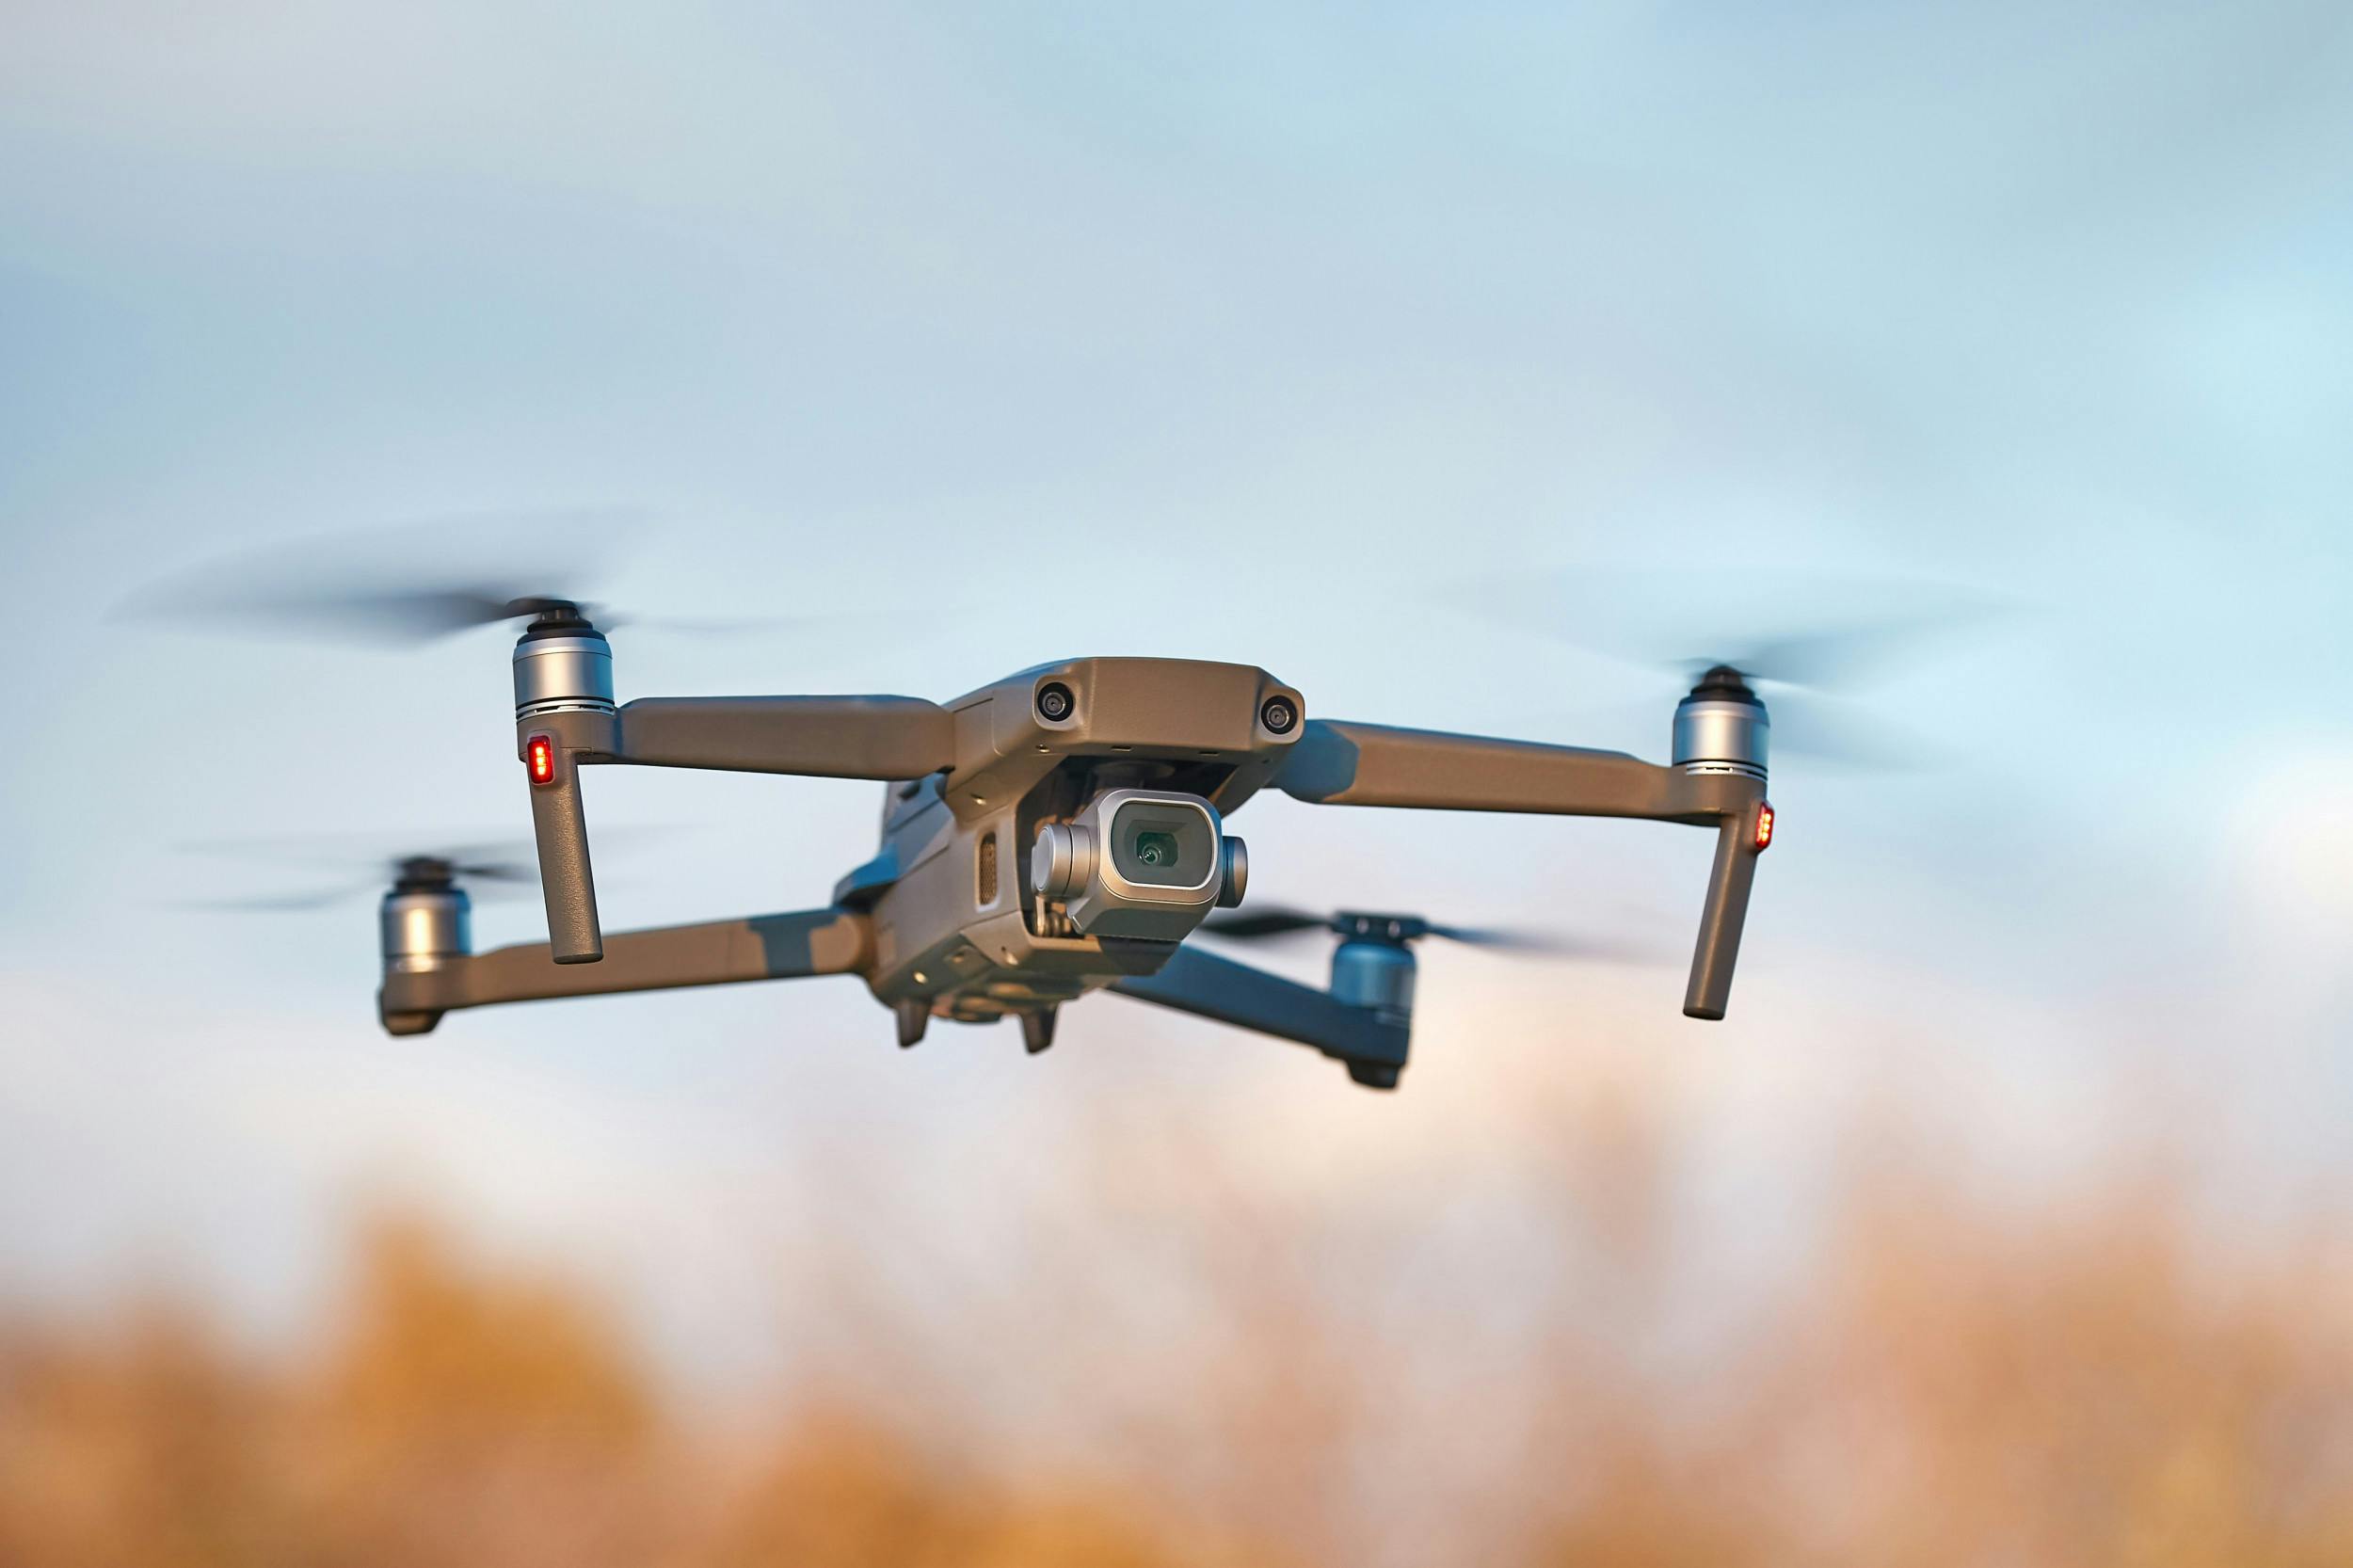 The Drone Economy Is Here, but How Do We Make It Safe? 